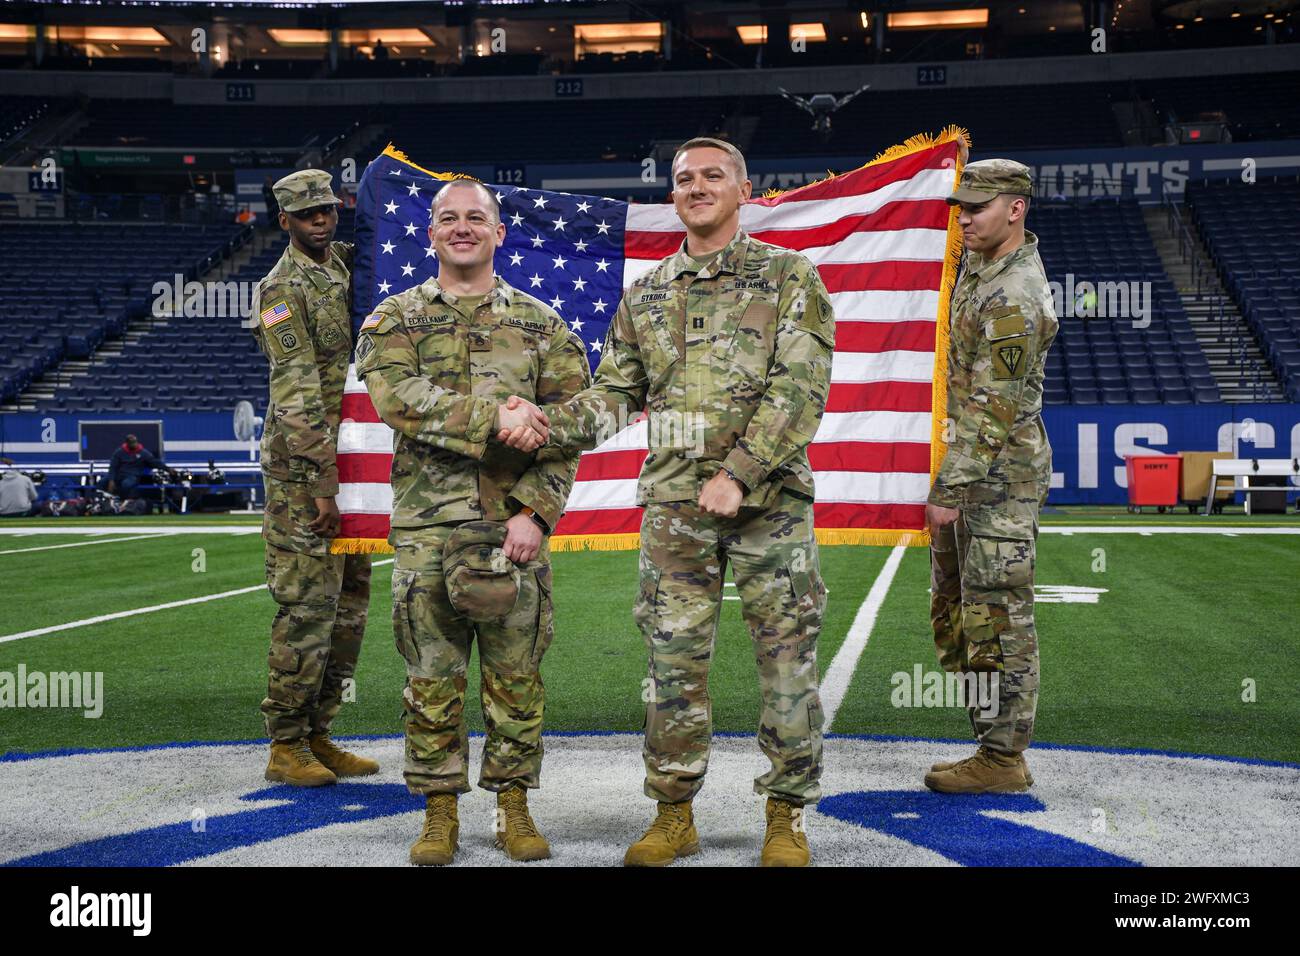 U.S. Army Staff Sgt. Christopher Eckelkamp poses with Indiana National Guard Capt. Aaron Sykora after extending his service at Lucas Oil Stadium in Indianapolis, Jan. 6, 2023. Eckelkamp has more than 15 years of faithful and selfless service. (Indiana National Guard Stock Photo